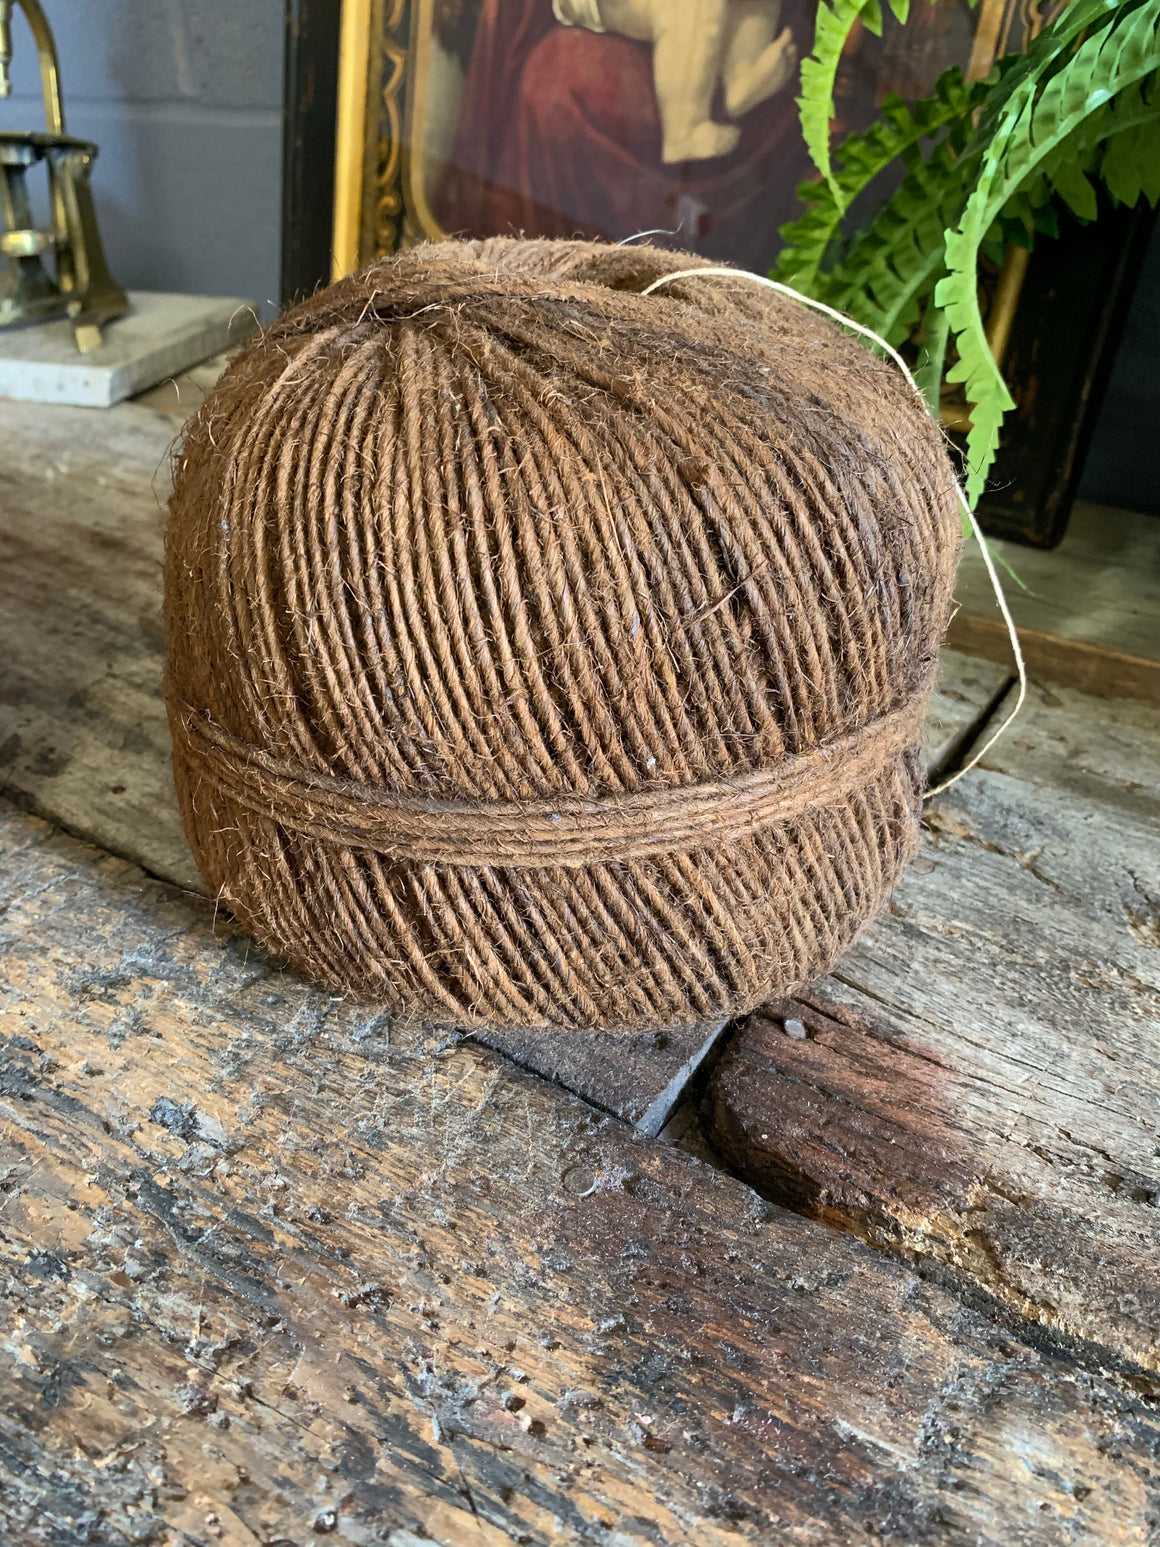 A large Victorian ball of twine